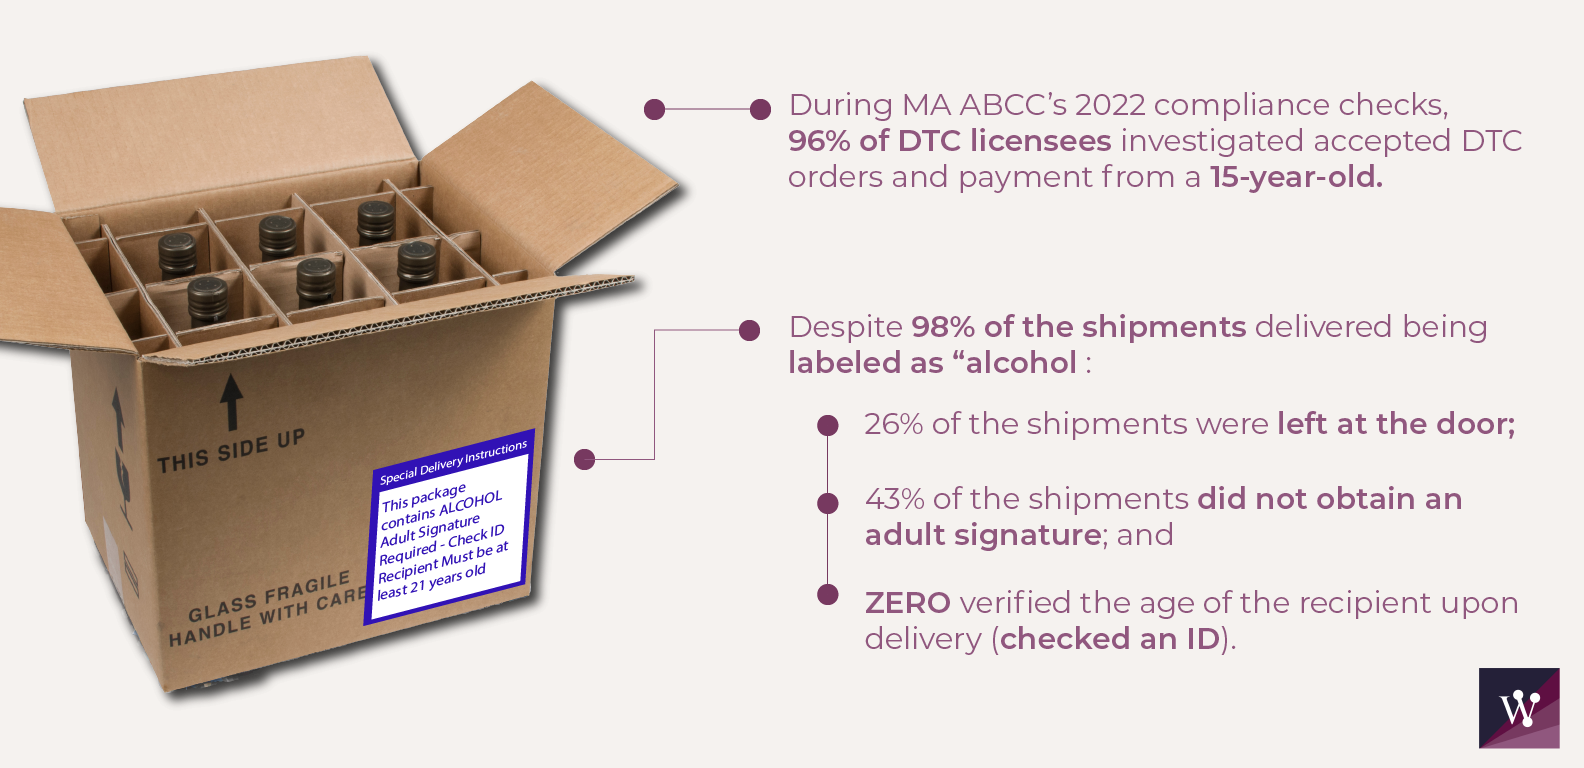 MA ABCC 2022 DTC Compliance Check Results